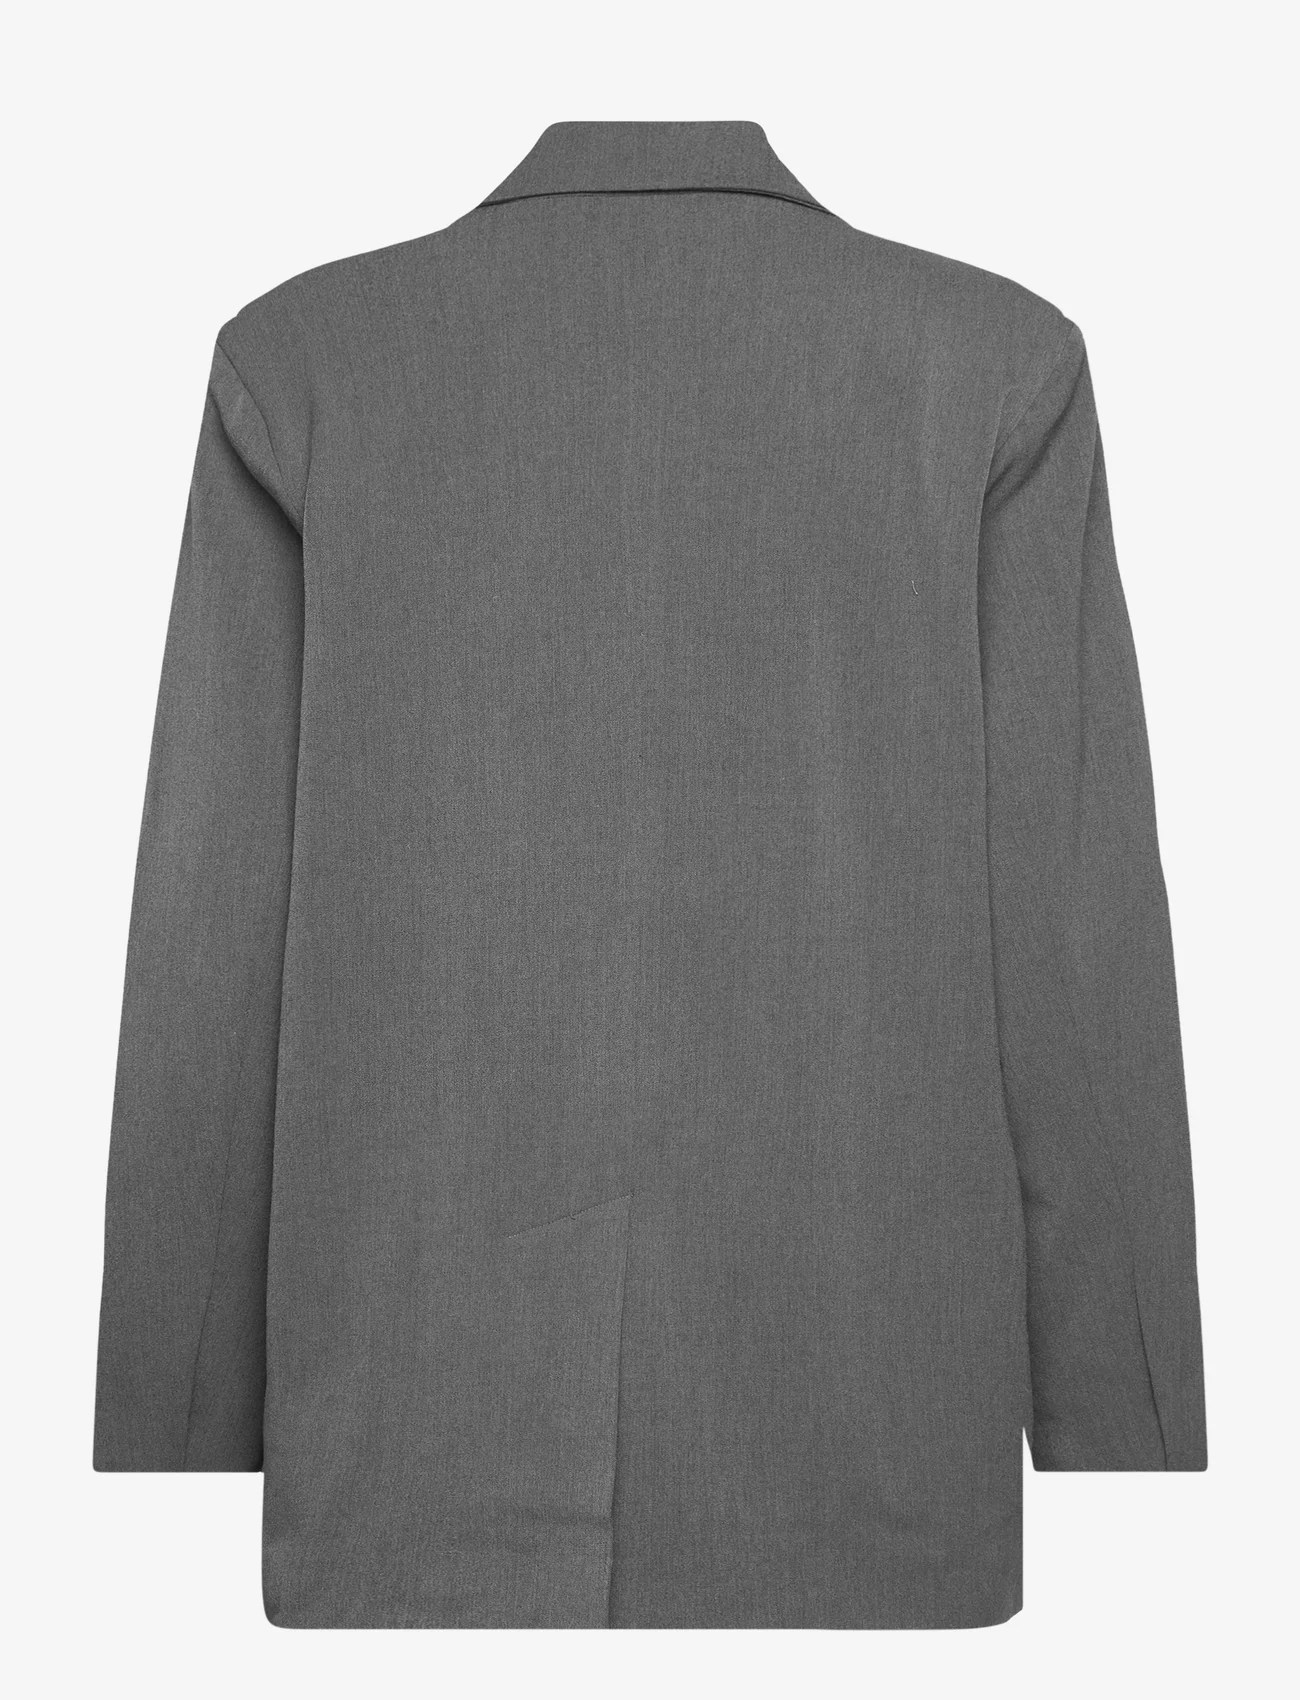 NORR - Carla blazer - party wear at outlet prices - dark grey - 1